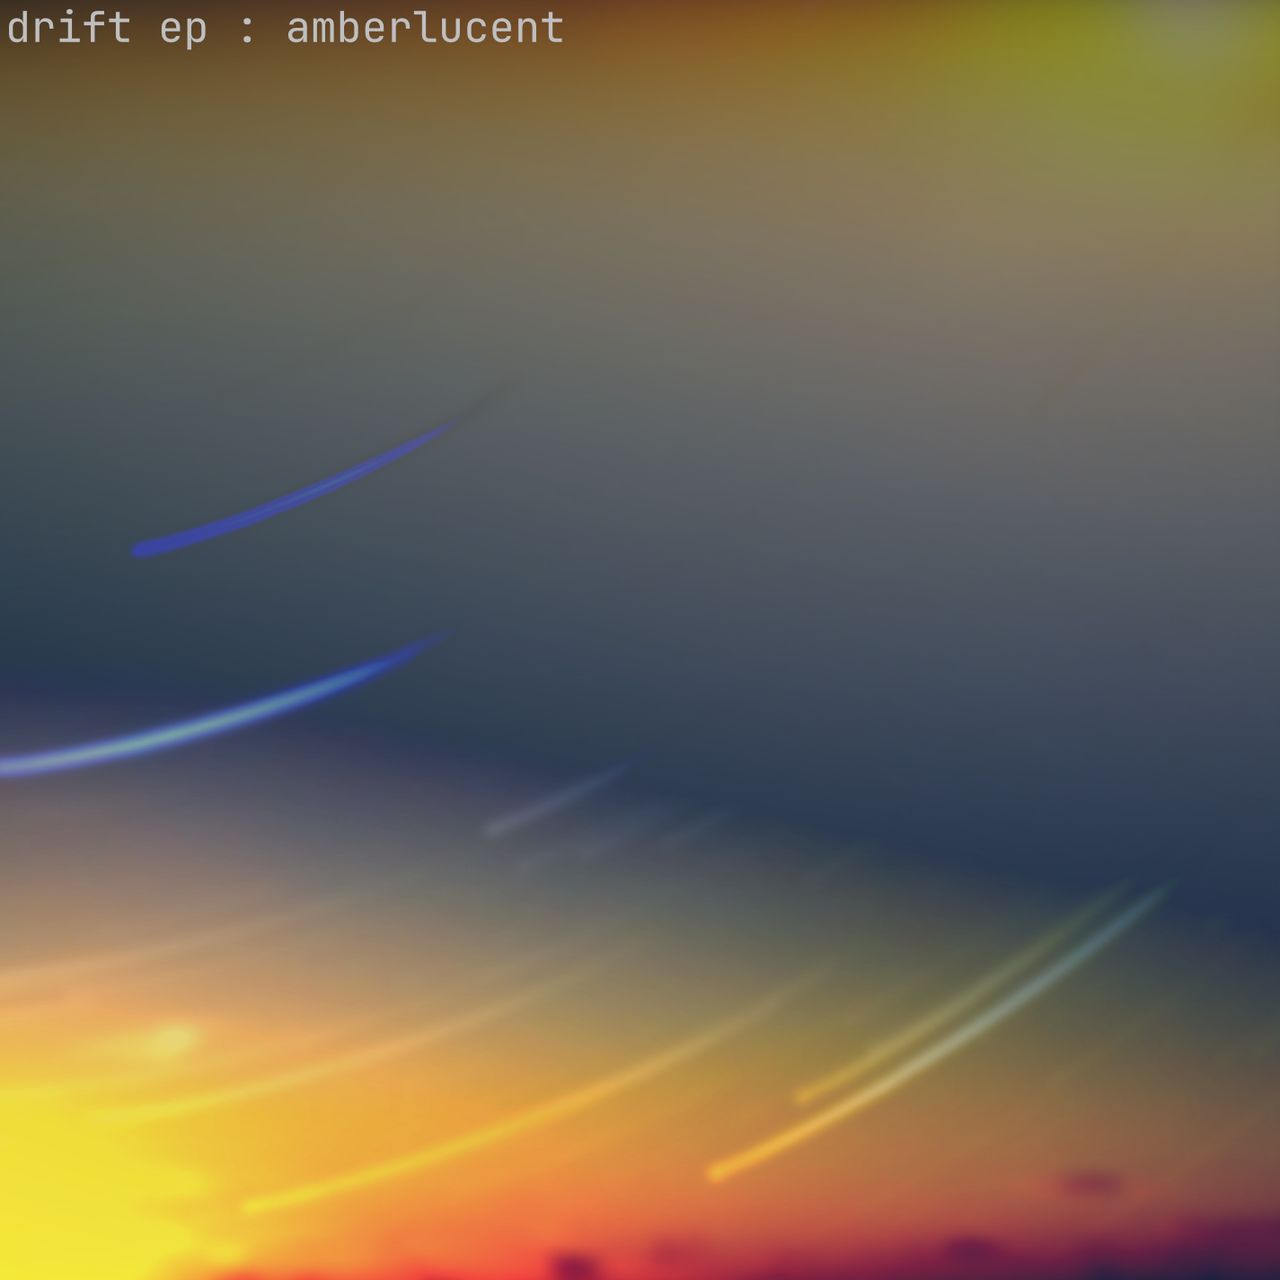 blurred timelapse of a twilight sky